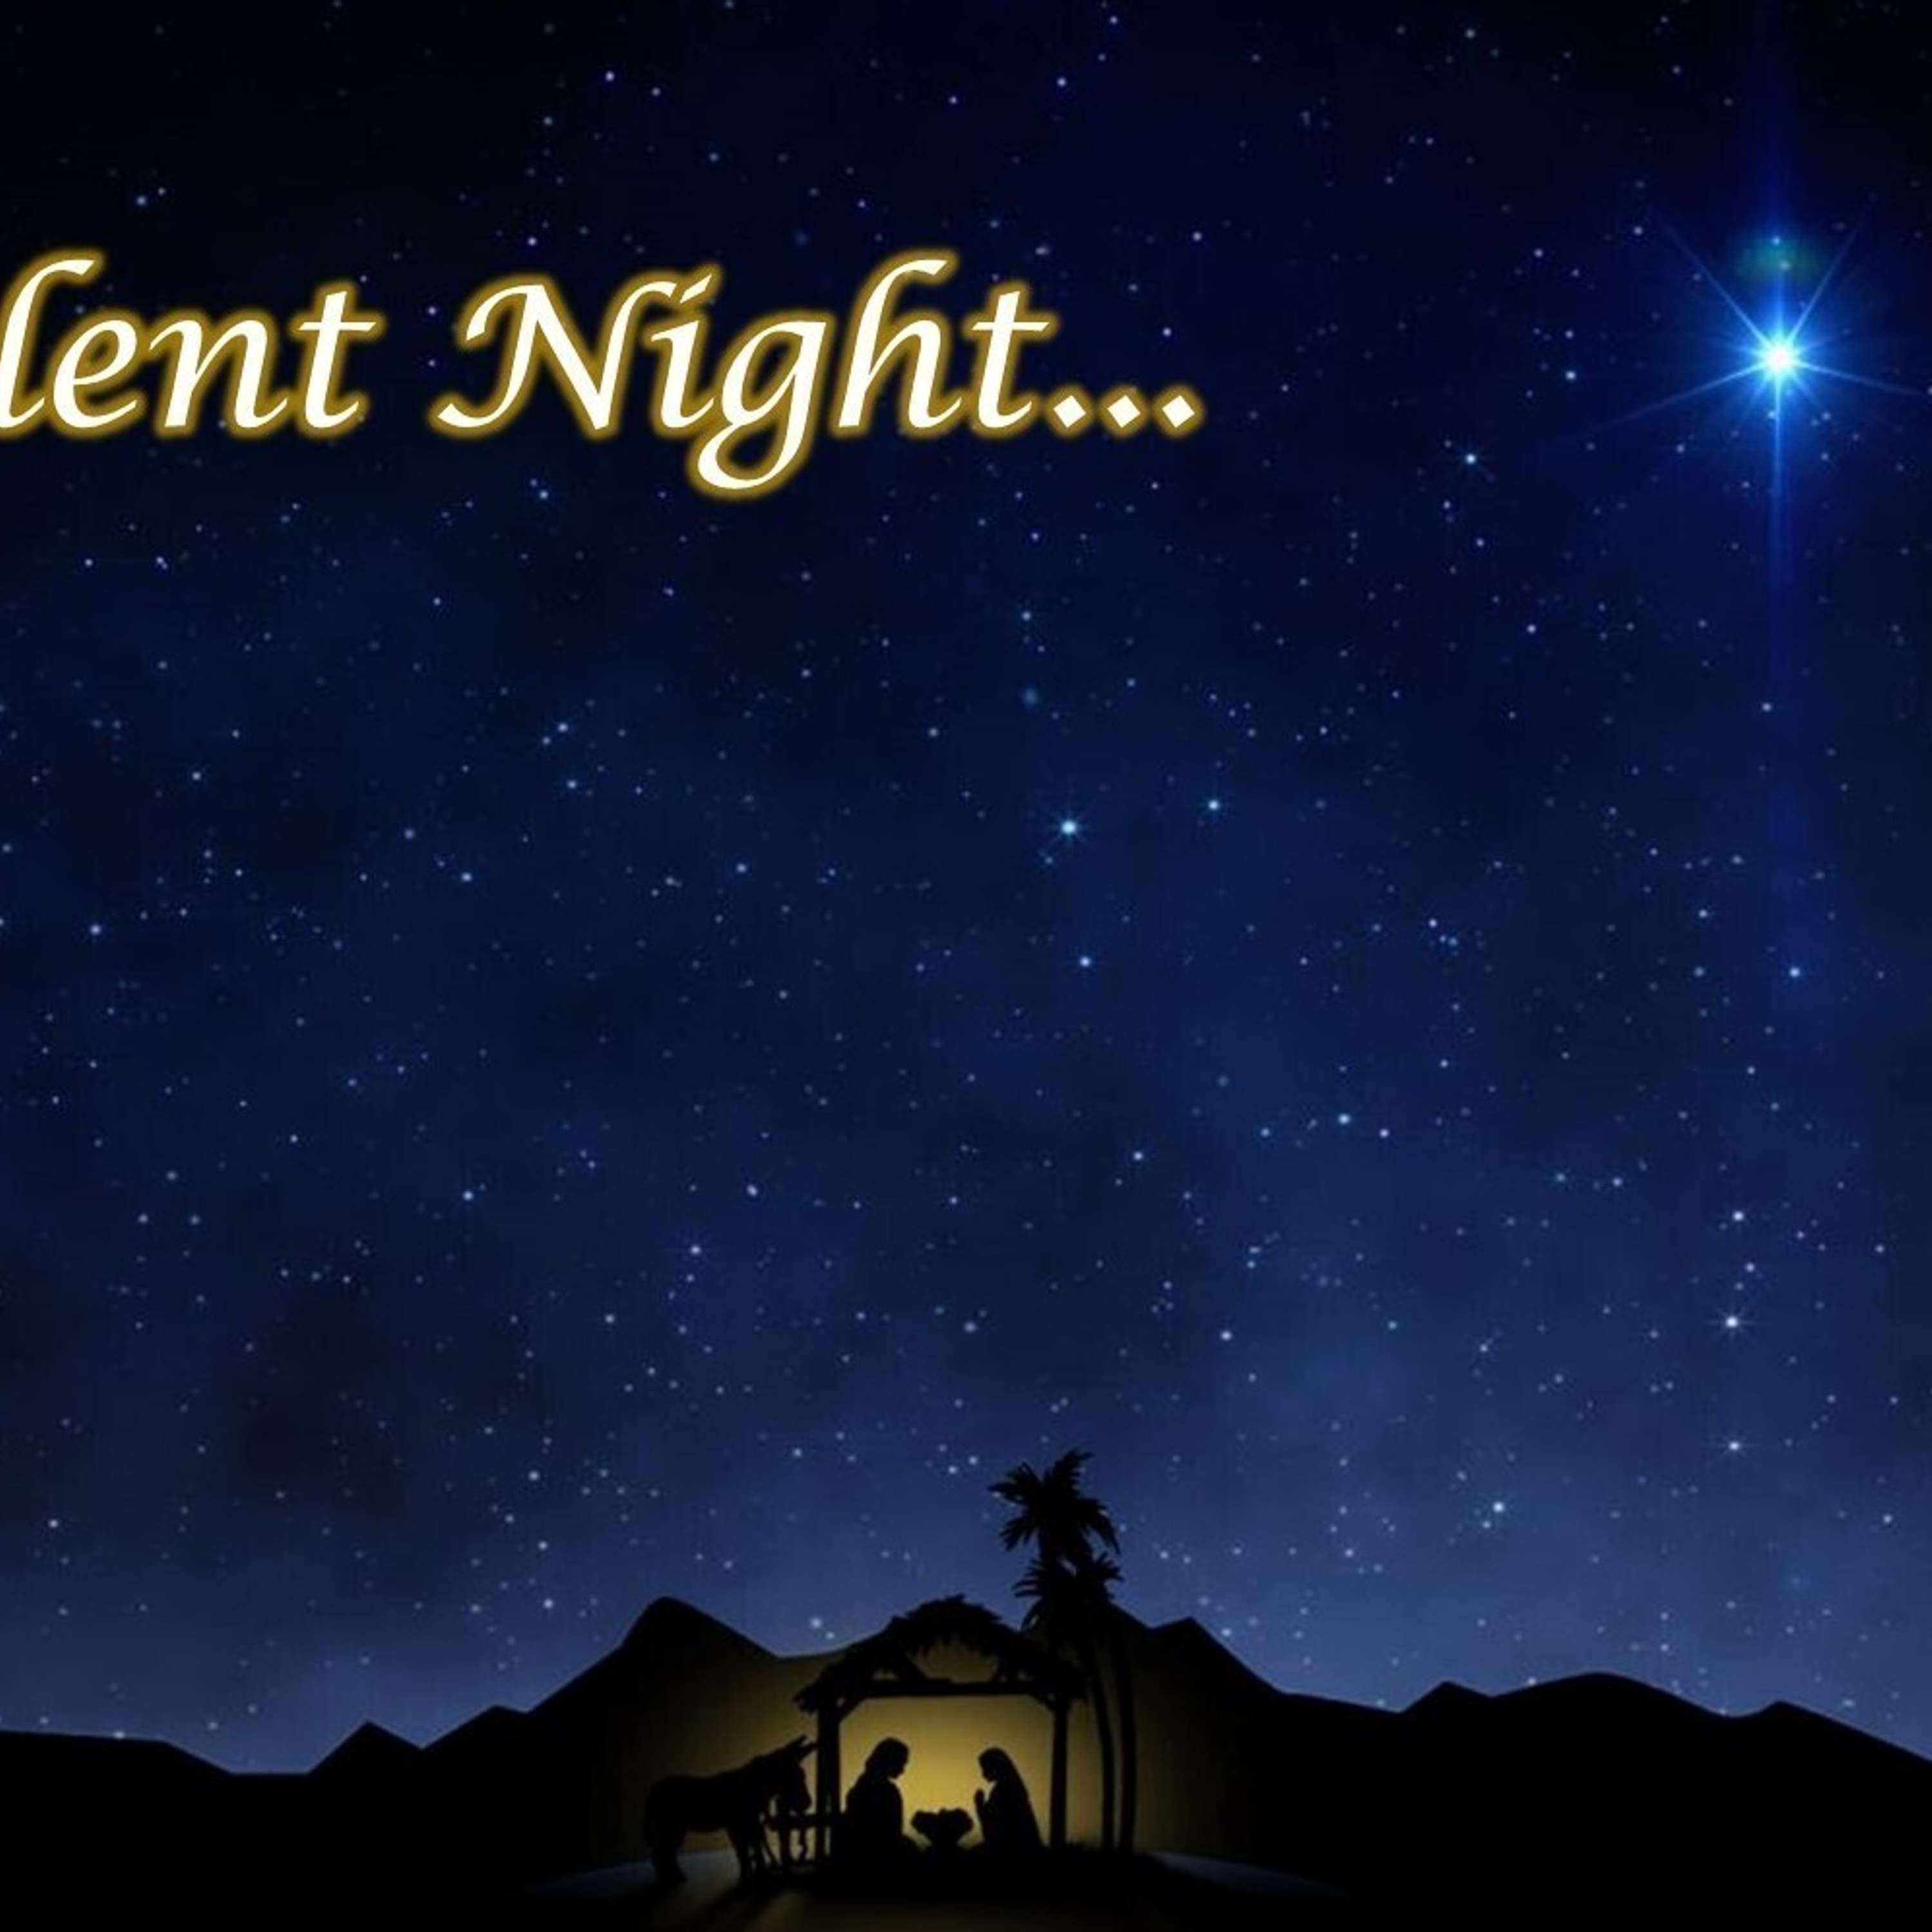 The Heart of Christmas: Silent Night...